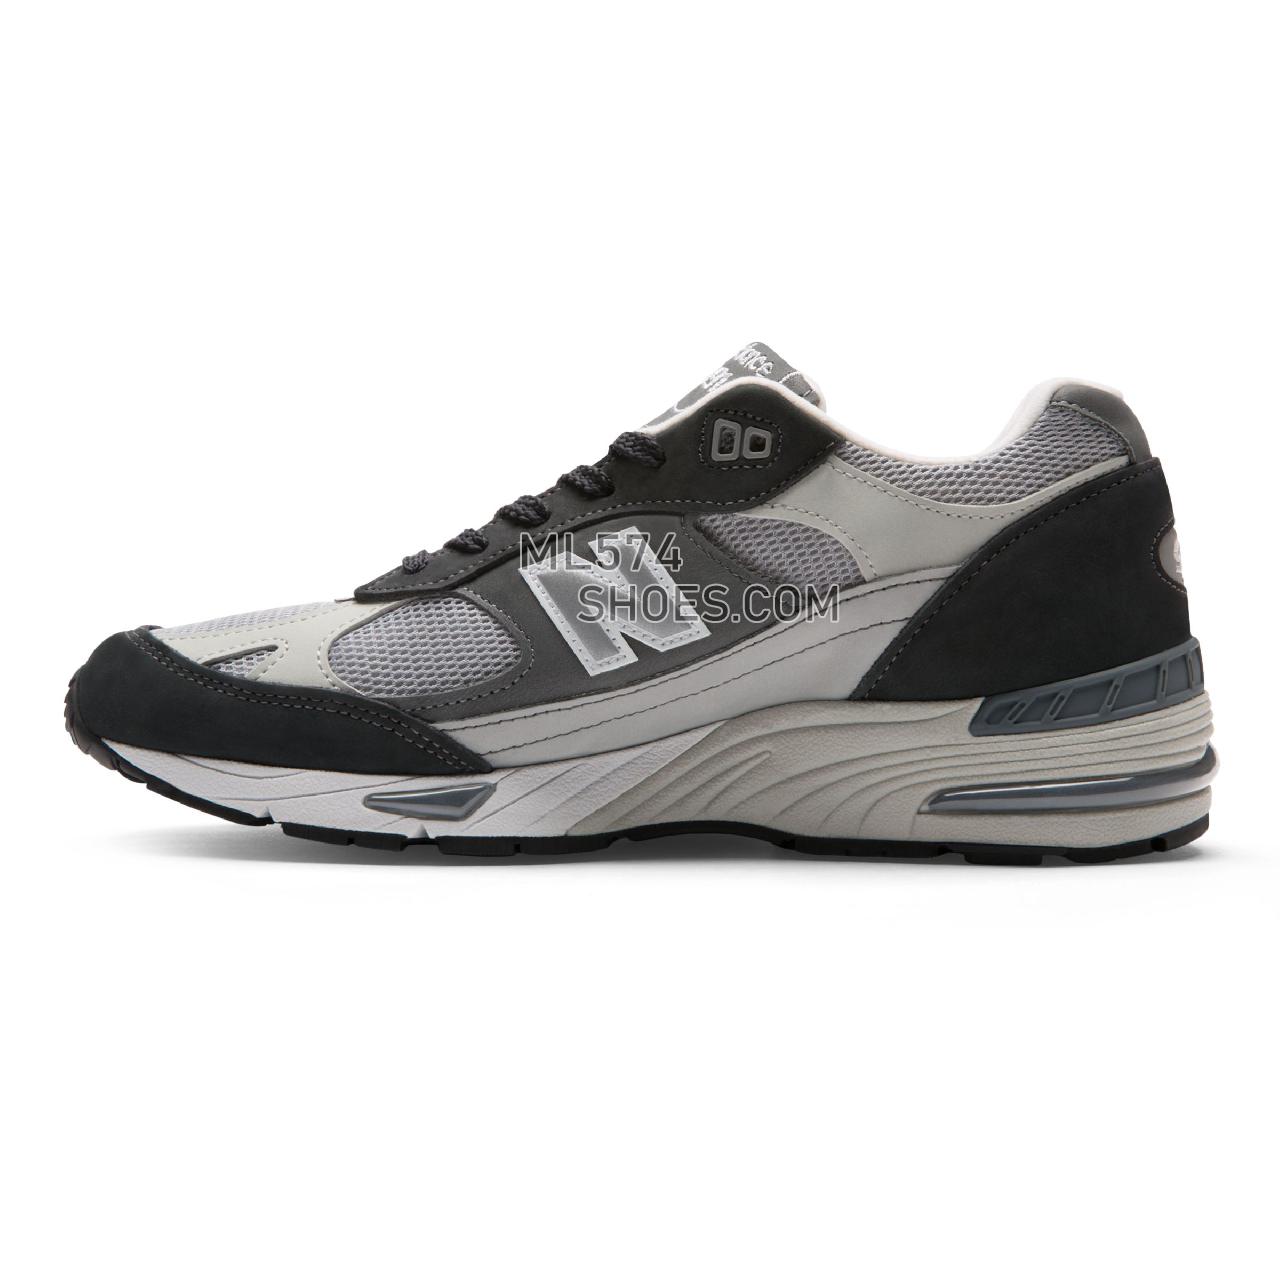 New Balance 991 Made in UK - Men's 991 - Classic Black with Grey and Arctic Fox - M991XG